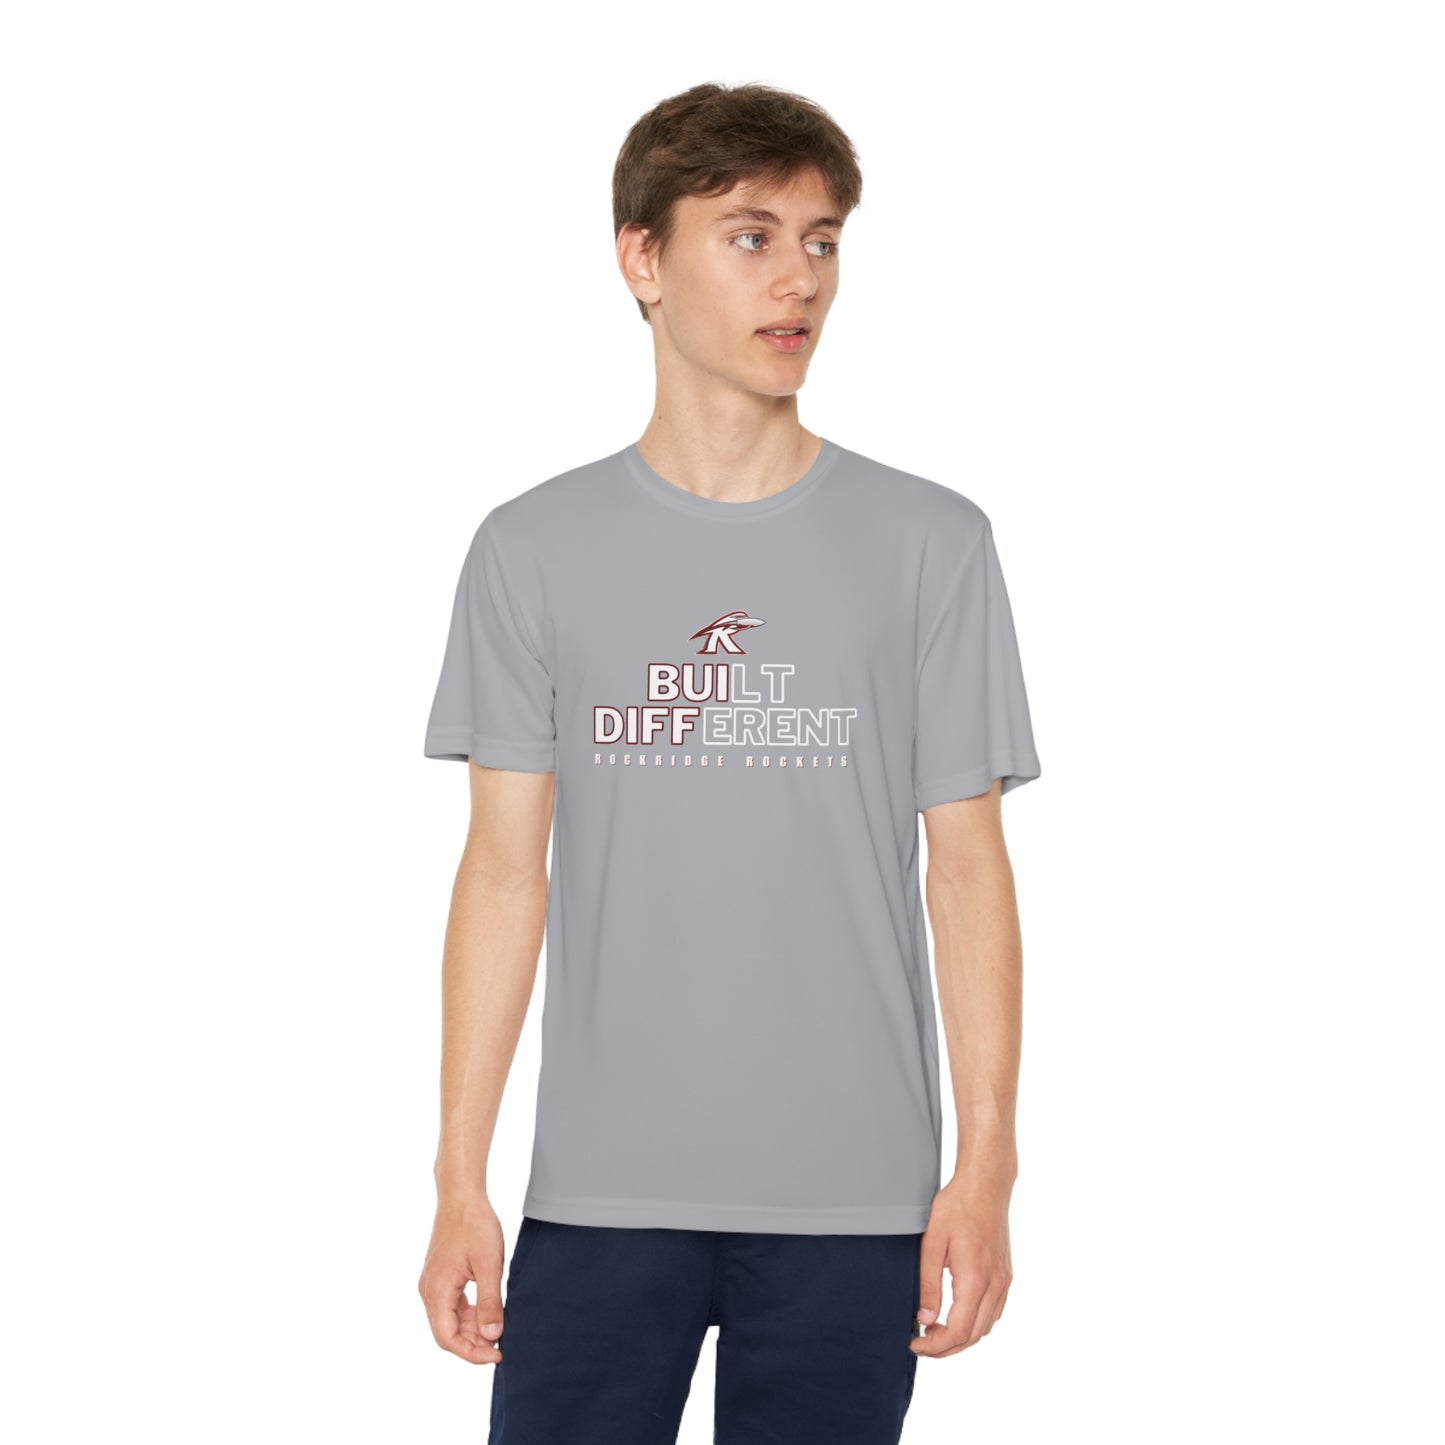 Built Different, Rockridge Rockets - Youth Competitor Tee